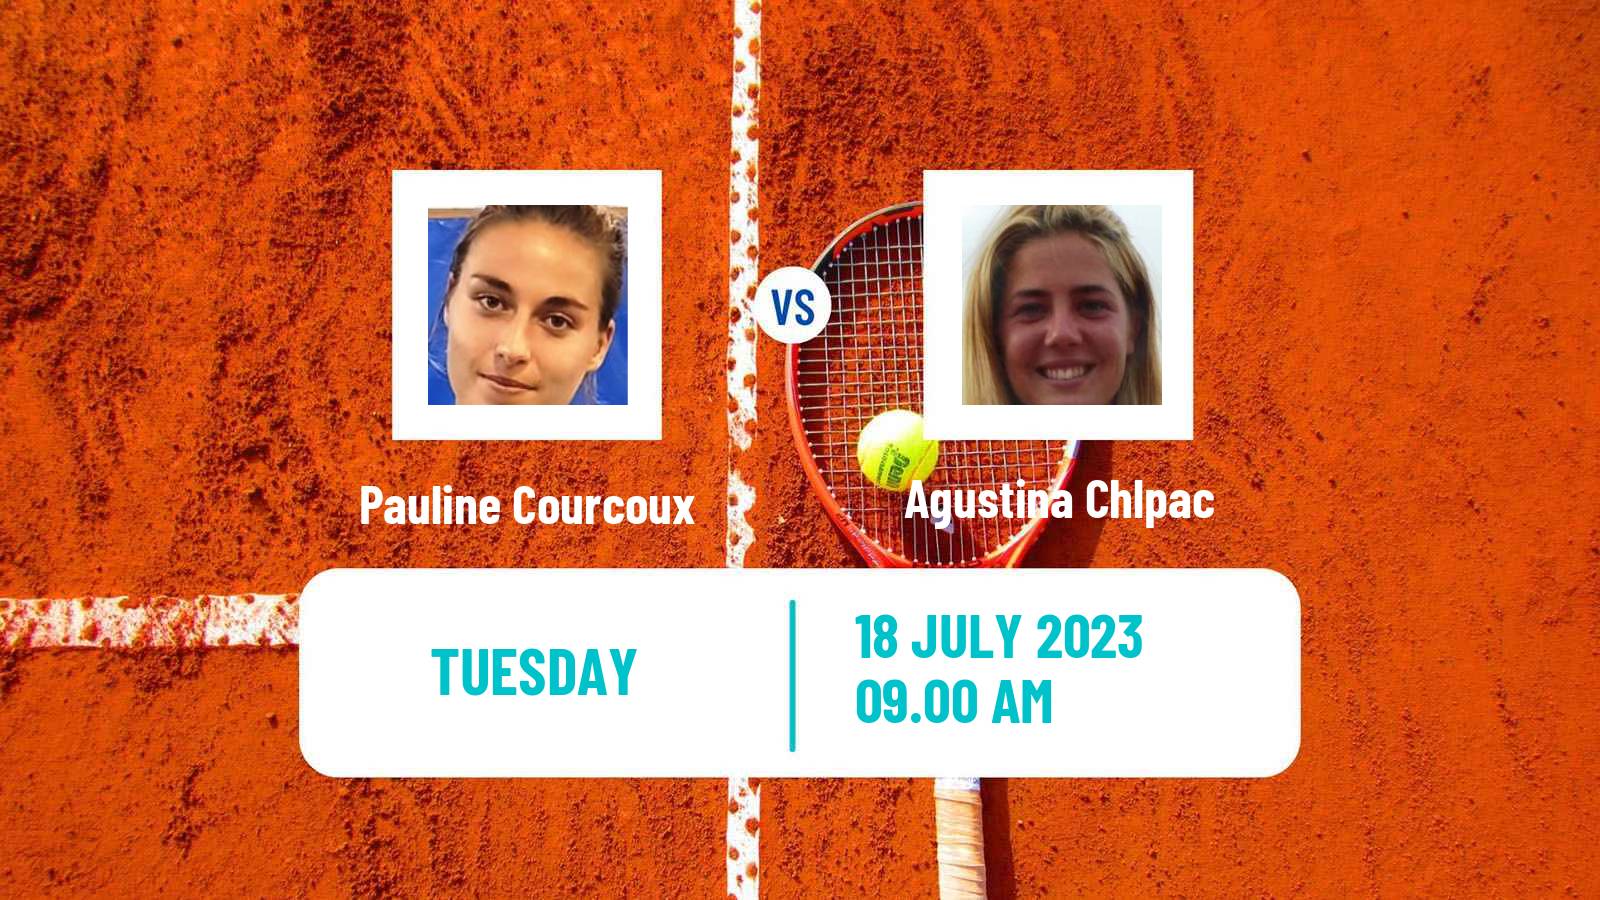 Tennis ITF W15 Les Contamines Montjoie Women Pauline Courcoux - Agustina Chlpac